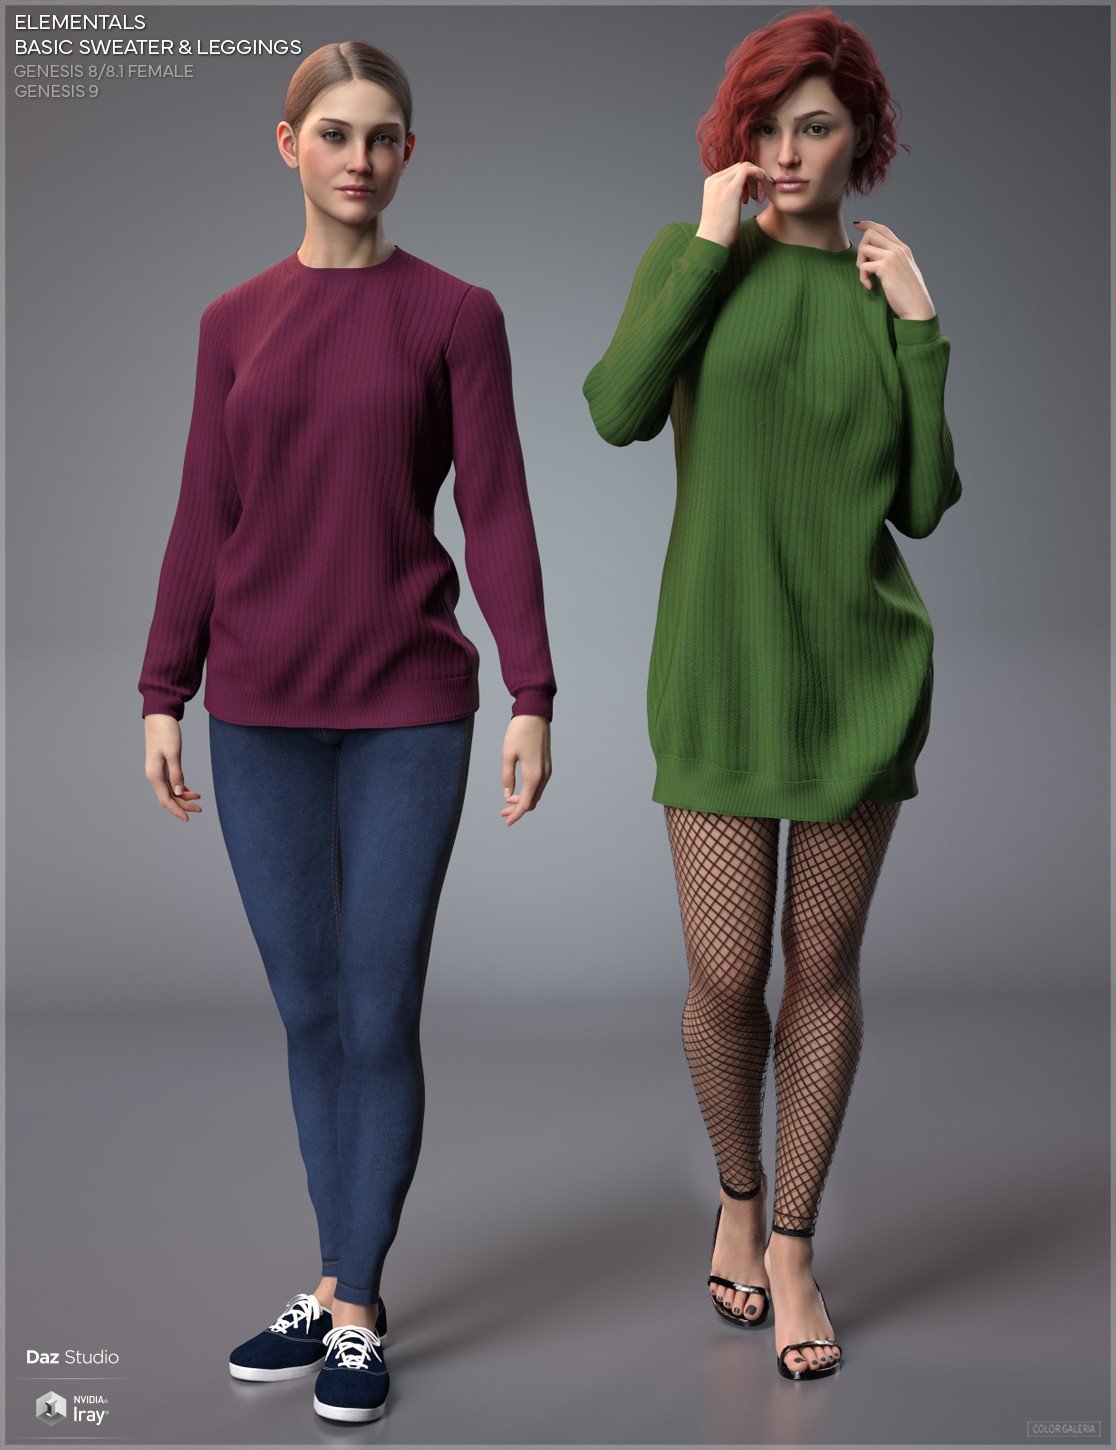 CGI Elementals - Basic Sweater & Leggings for Genesis 8-8.1F and Genesis 9 by: Color Galeria, 3D Models by Daz 3D